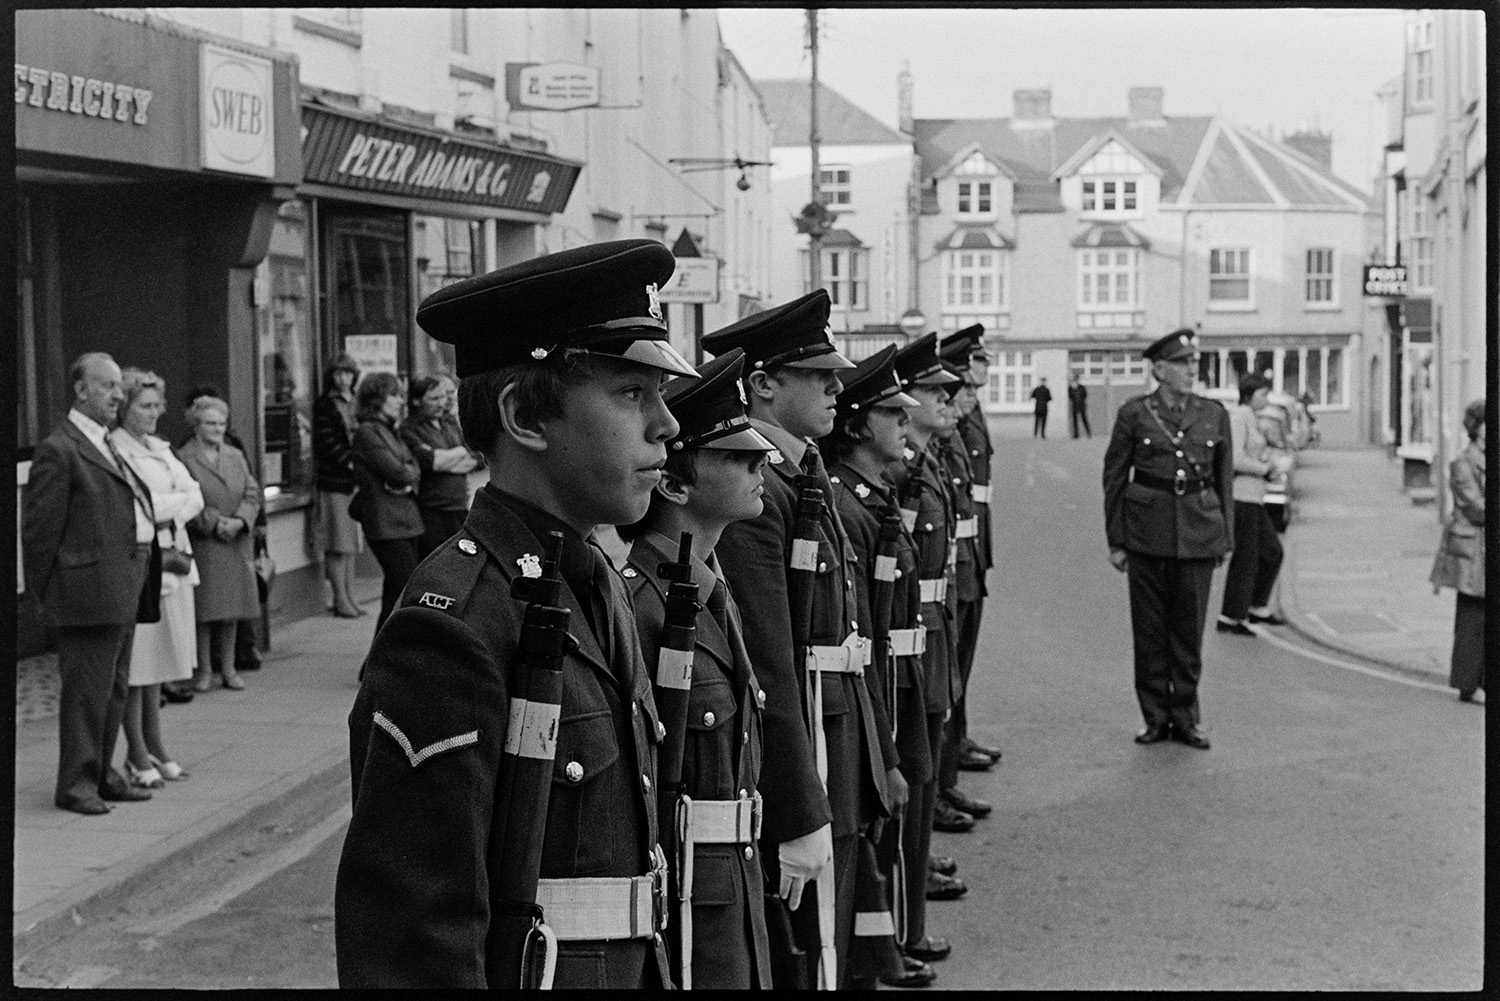 Military parade round town with Brass Band. 
[Boys lined up in uniform and holding guns, for a military parade in Torrington. Spectators are watching from the side of the street, outside shop fronts.]